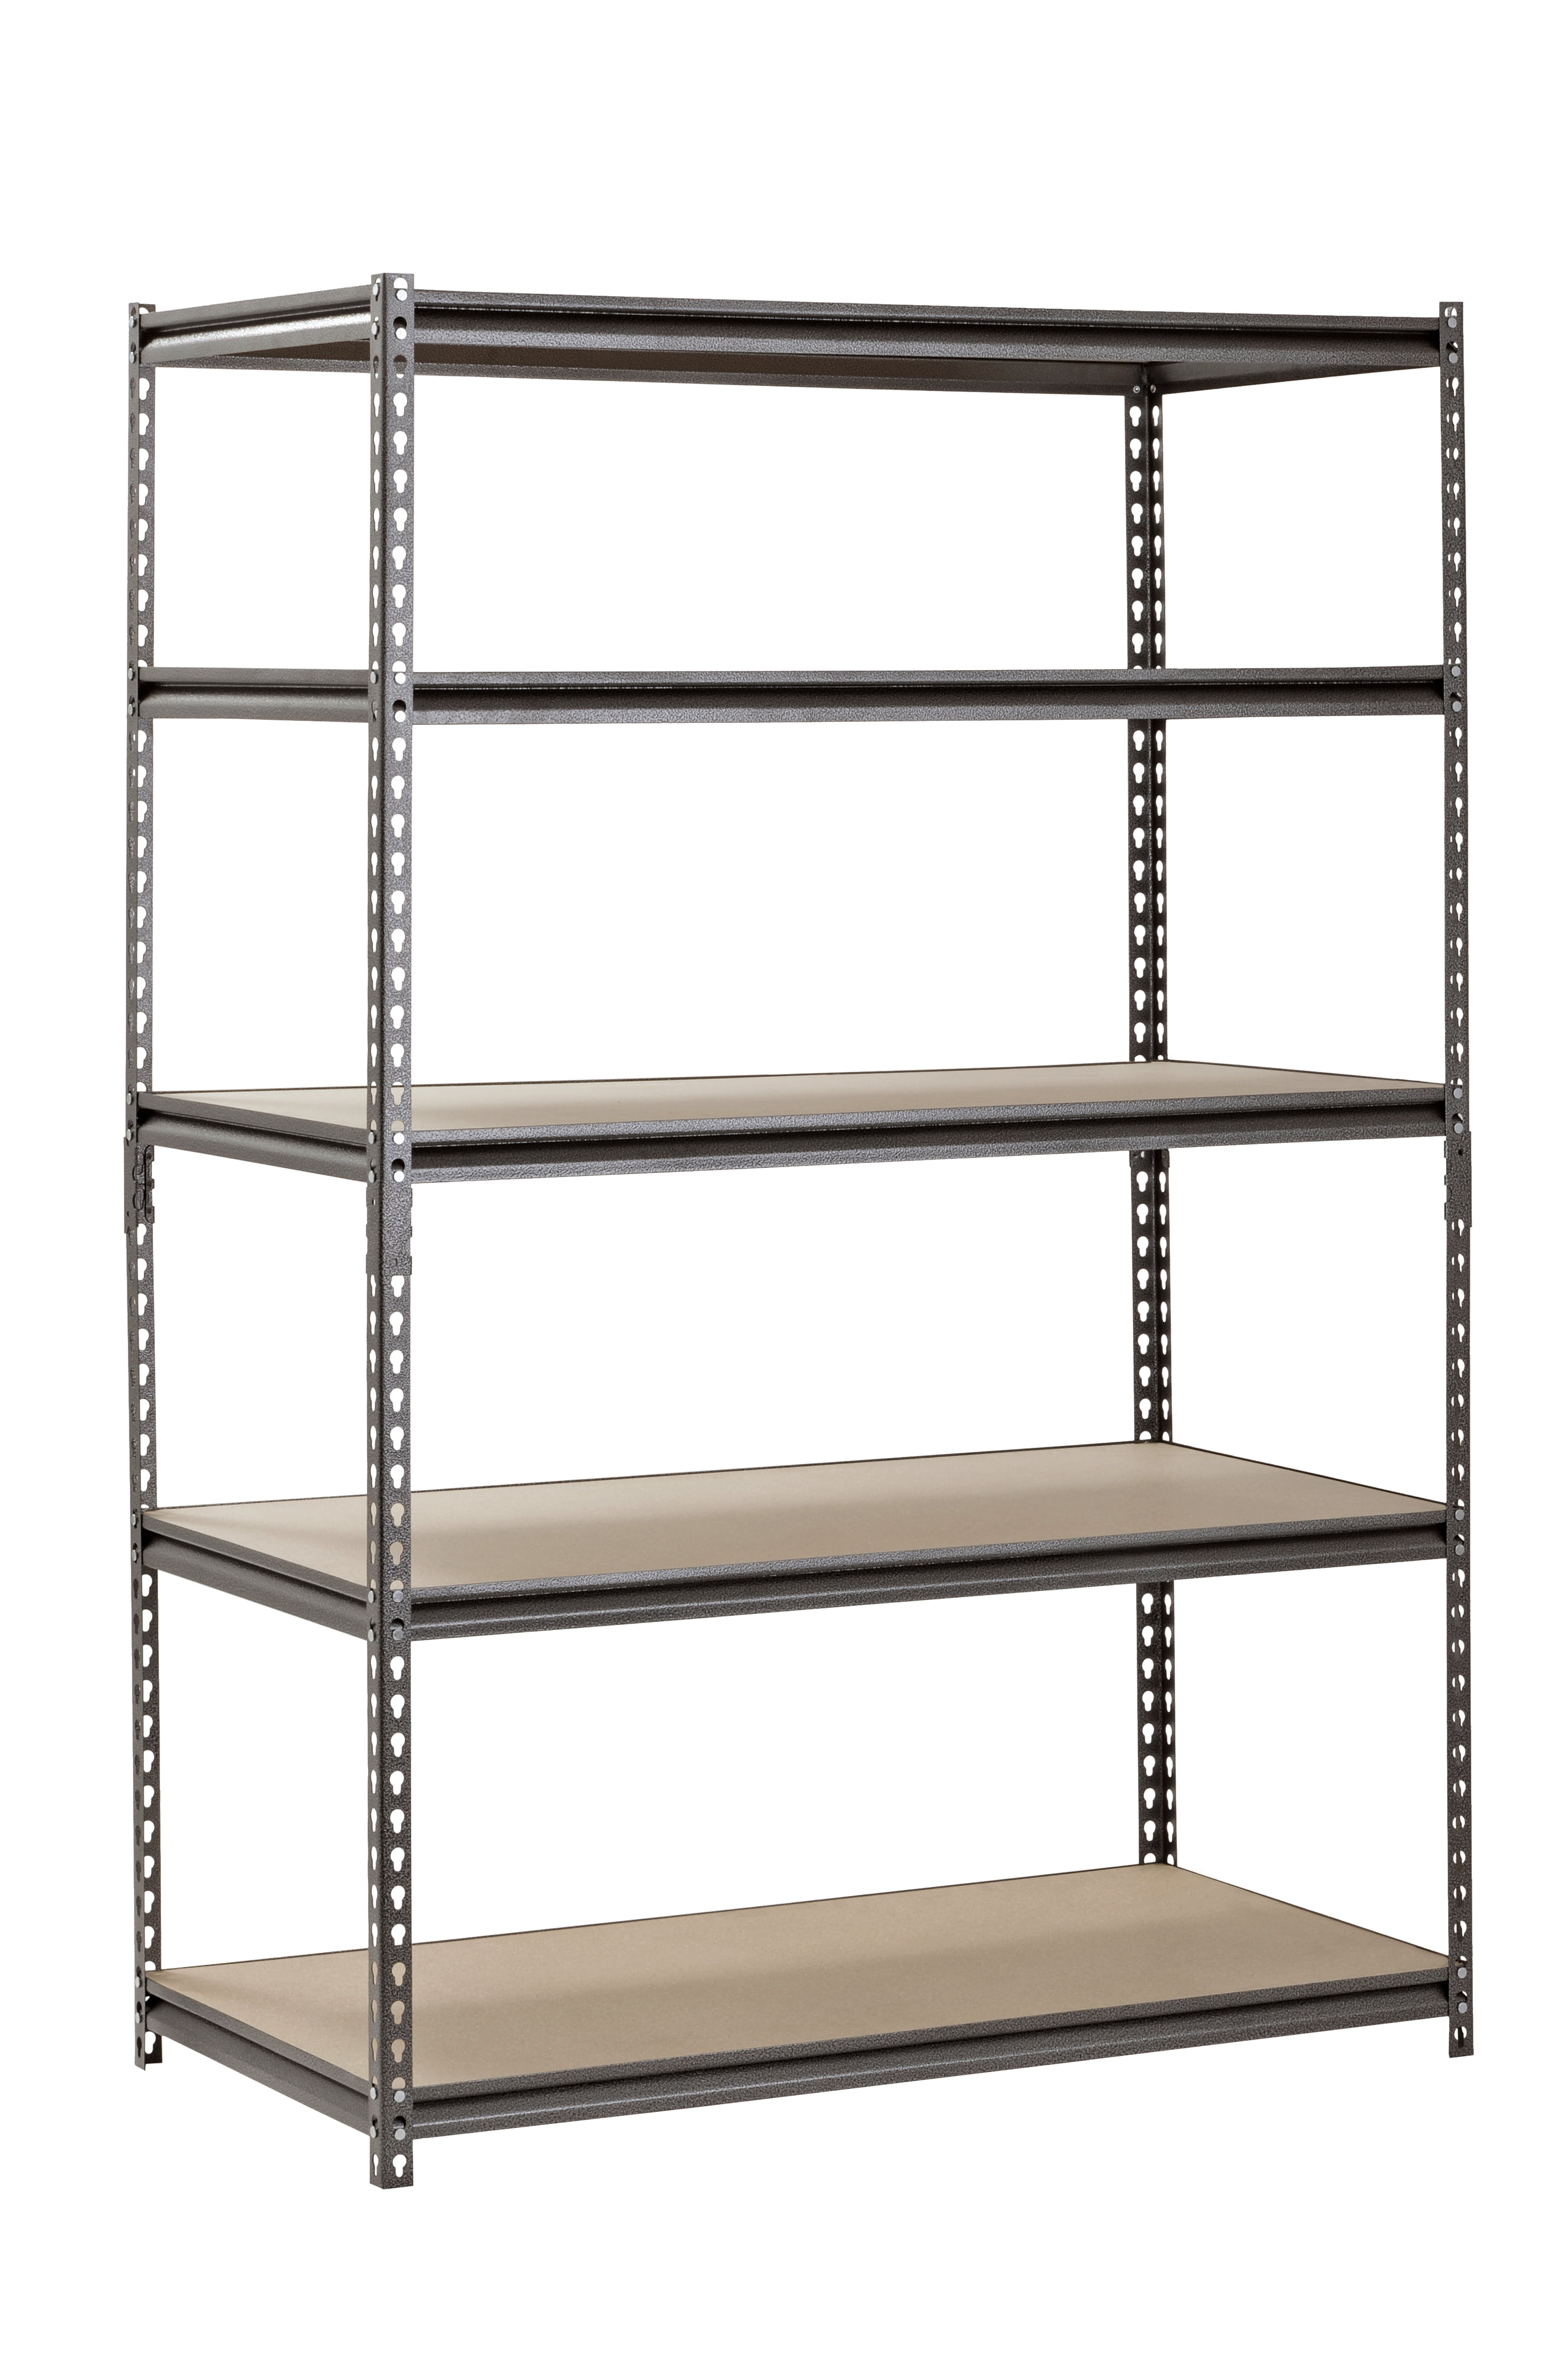 Solid Stainless Steel Shelving - 48 x 24 x 72